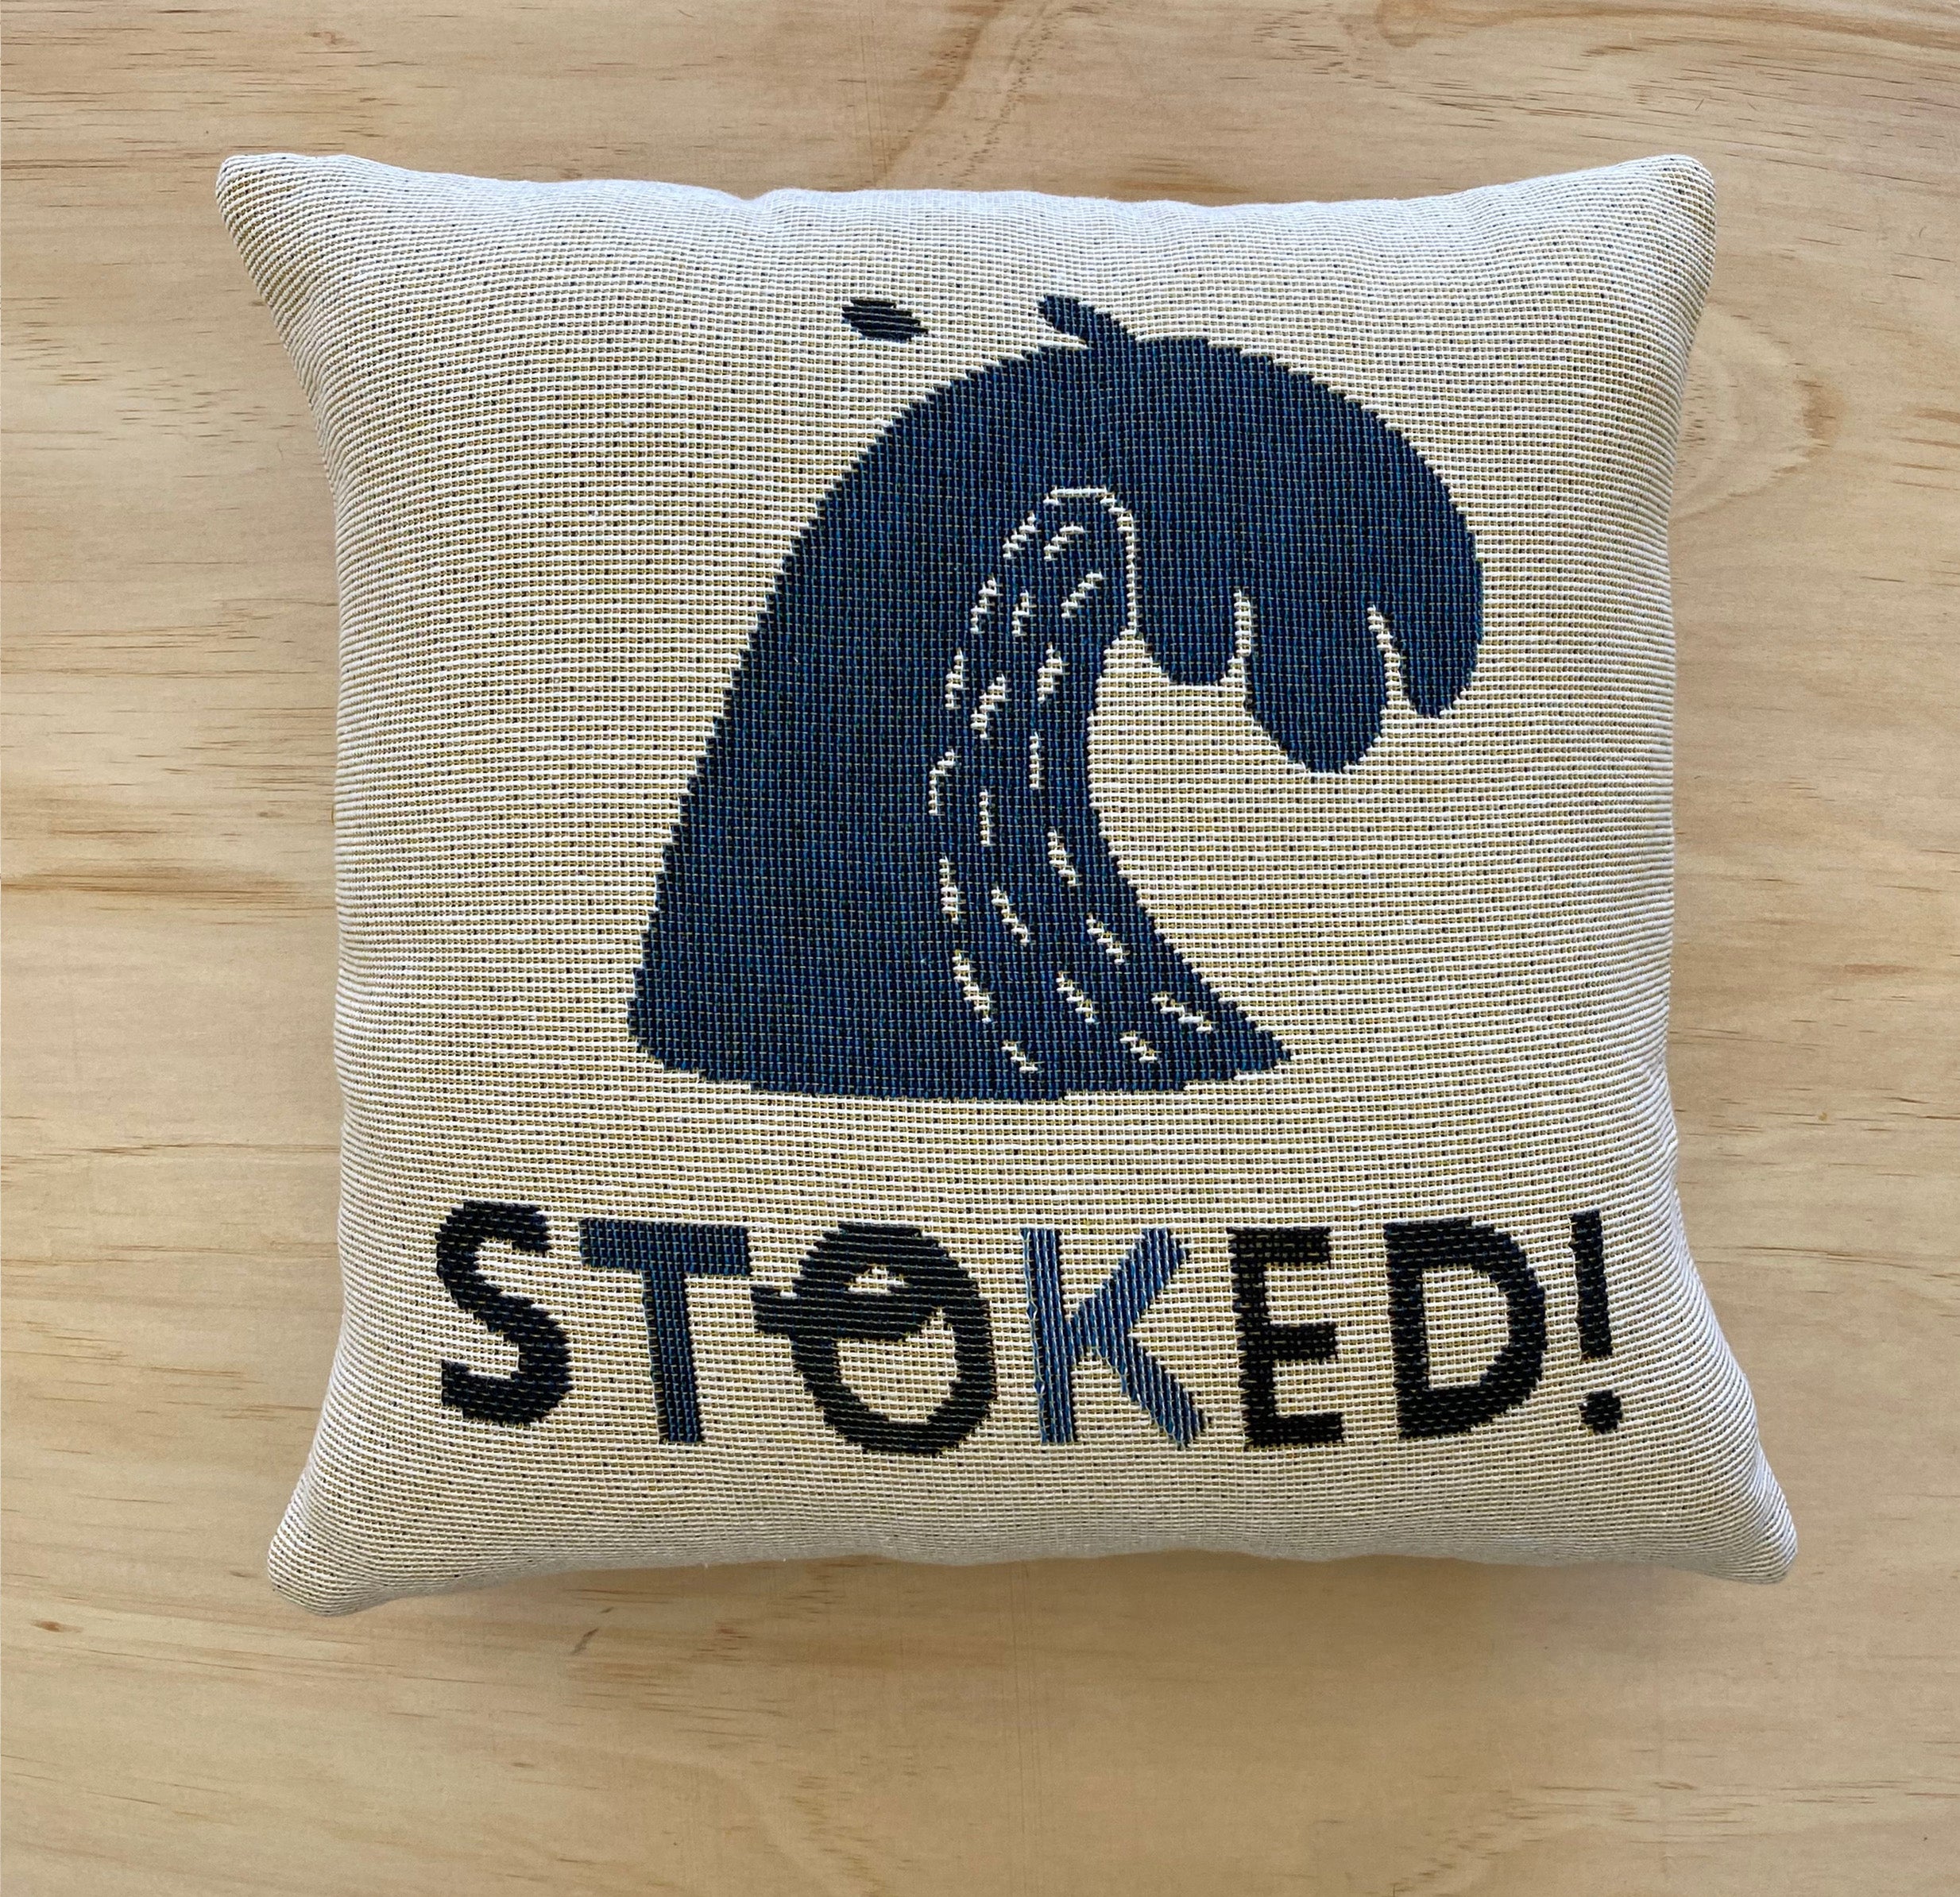 Whale Hooked Pillow